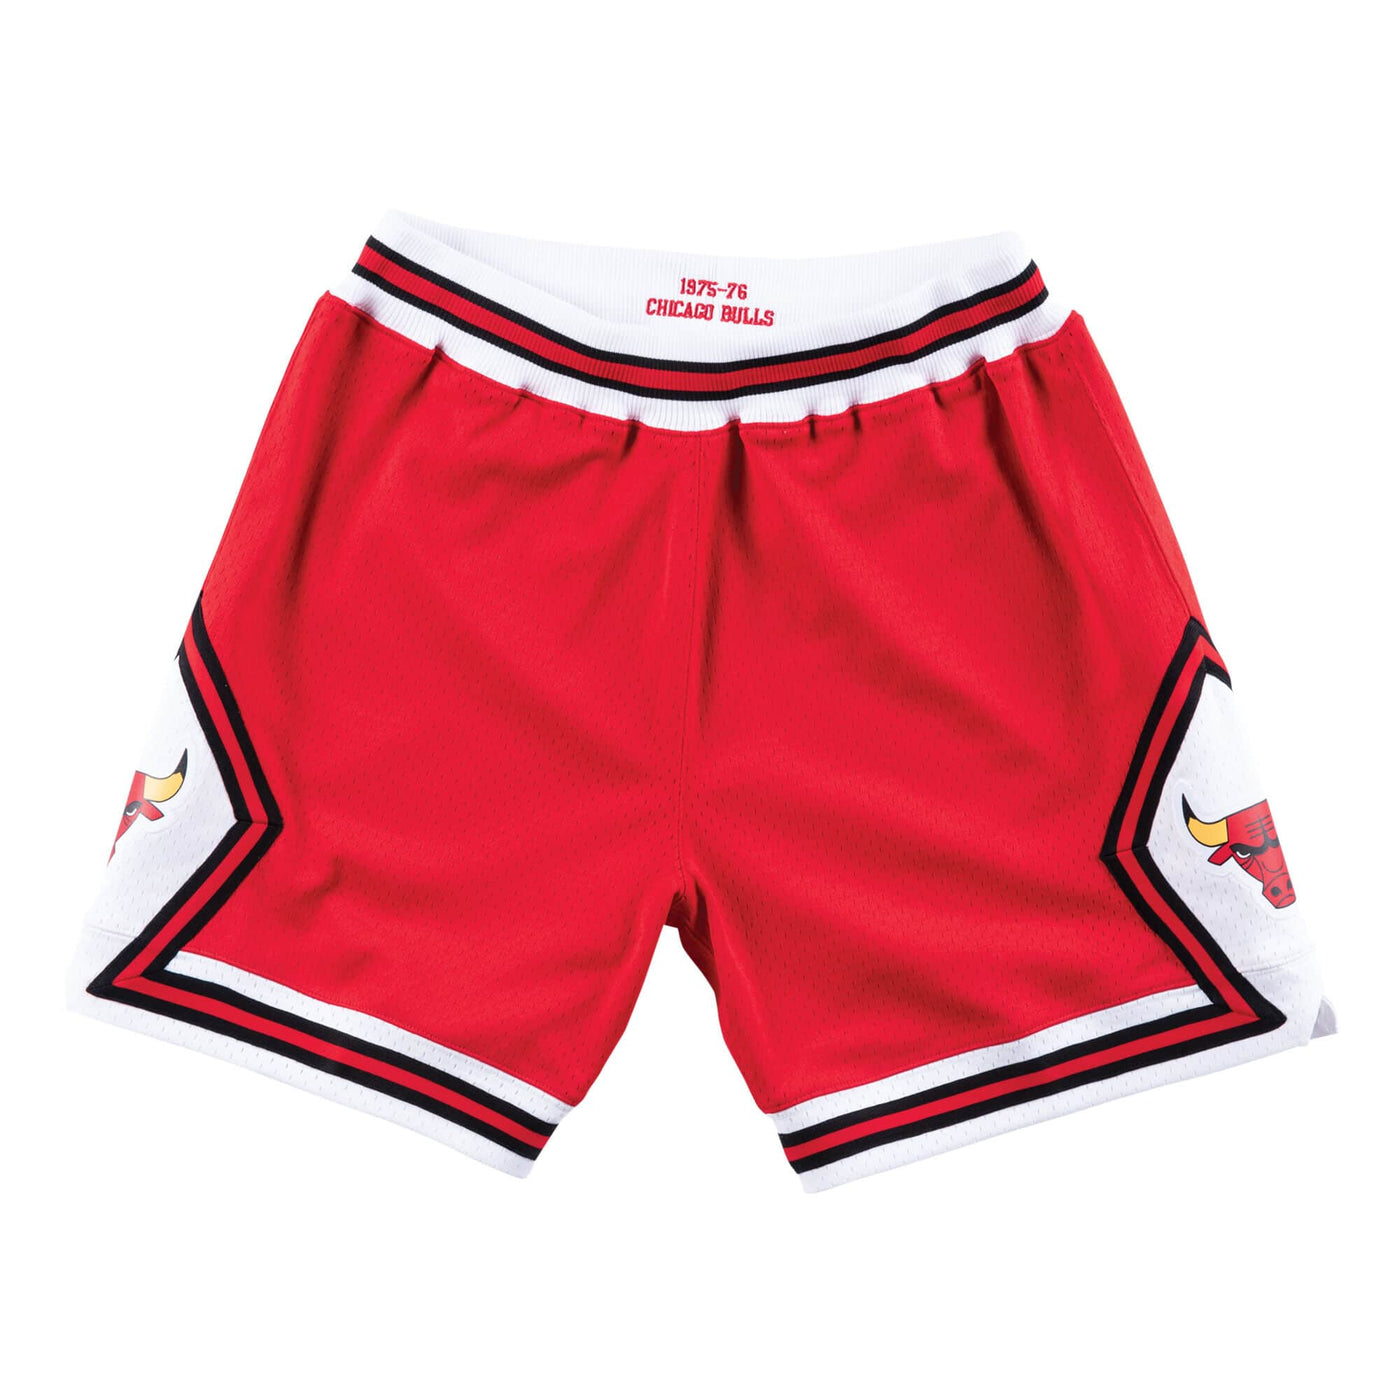 Mitchell & Ness NBA Chicago Bulls Authentic Road 1975-76 Shorts Red W –  FCS Sneakers